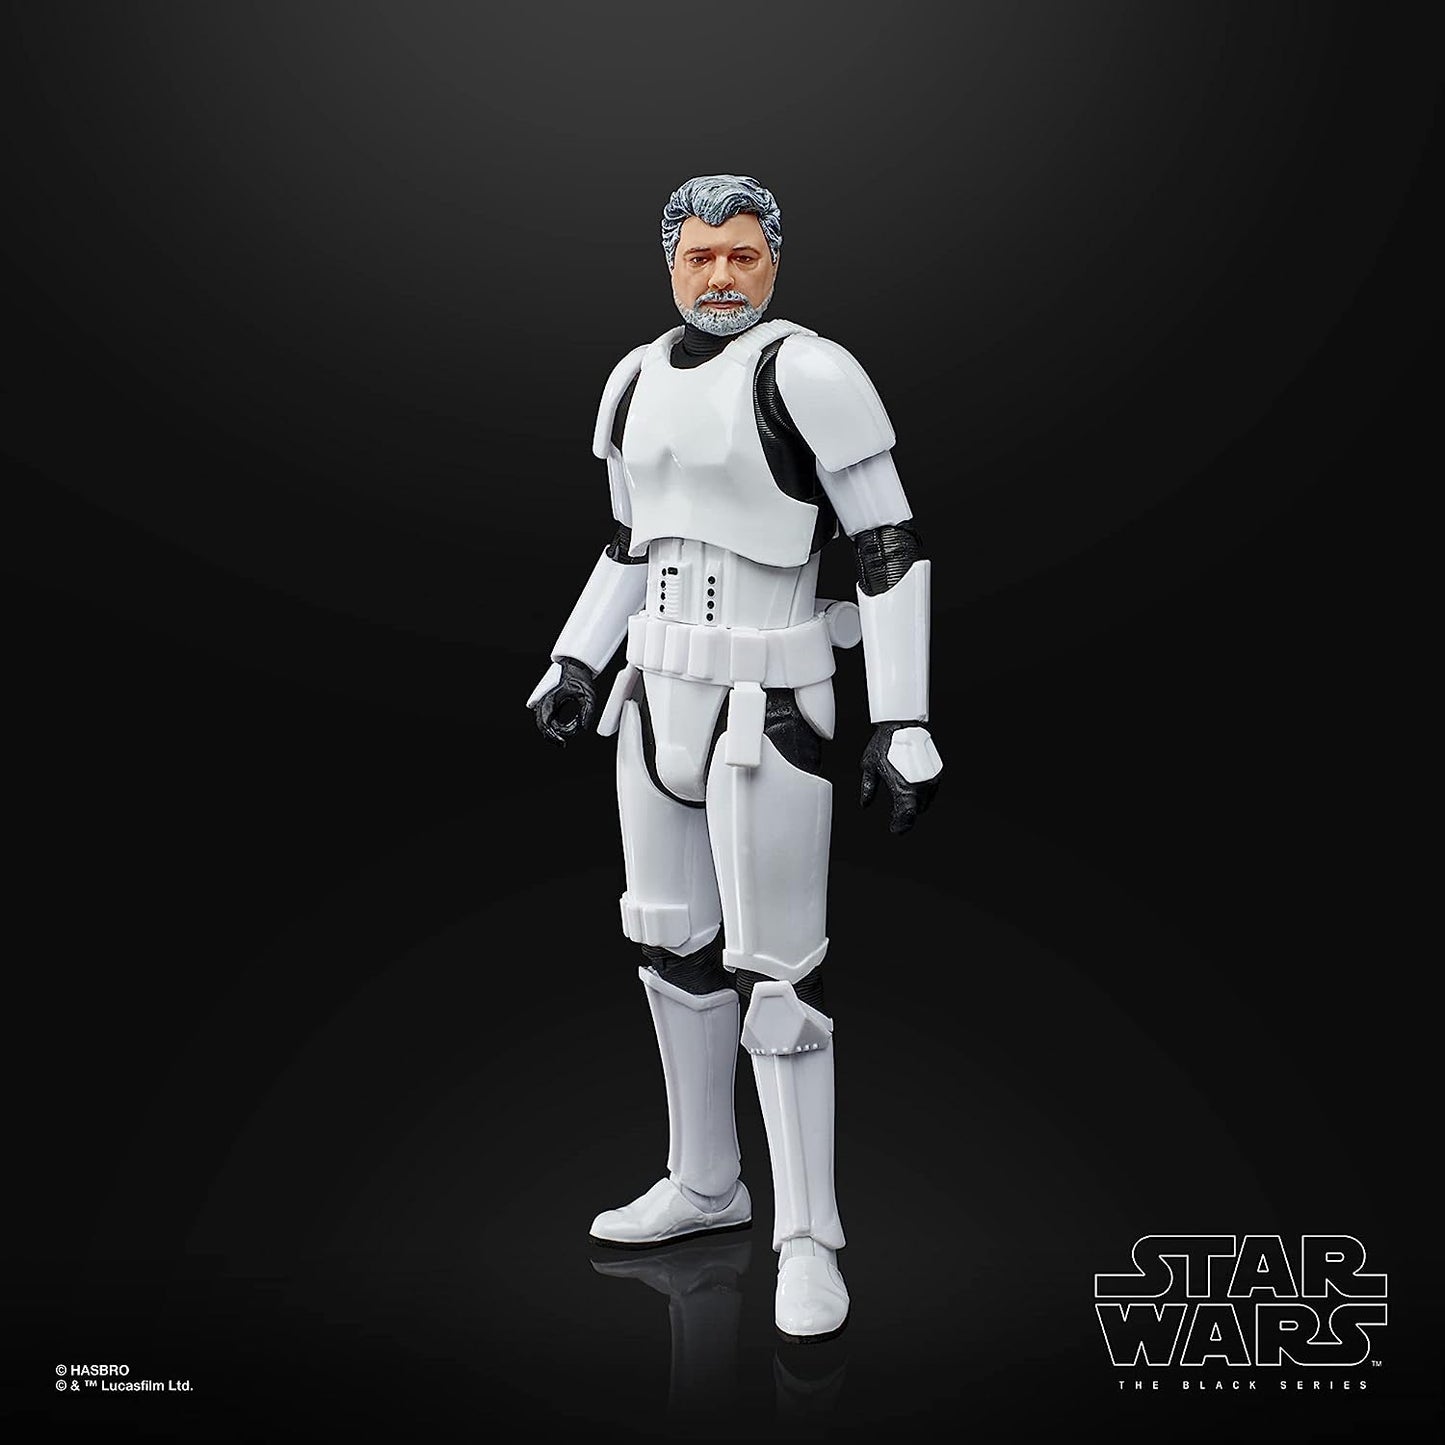 STAR WARS The Black Series George Lucas (in Stormtrooper Disguise) Toy 6-Inch-Scale Lucasfilm 50th Anniversary Figure, Collectible Toy